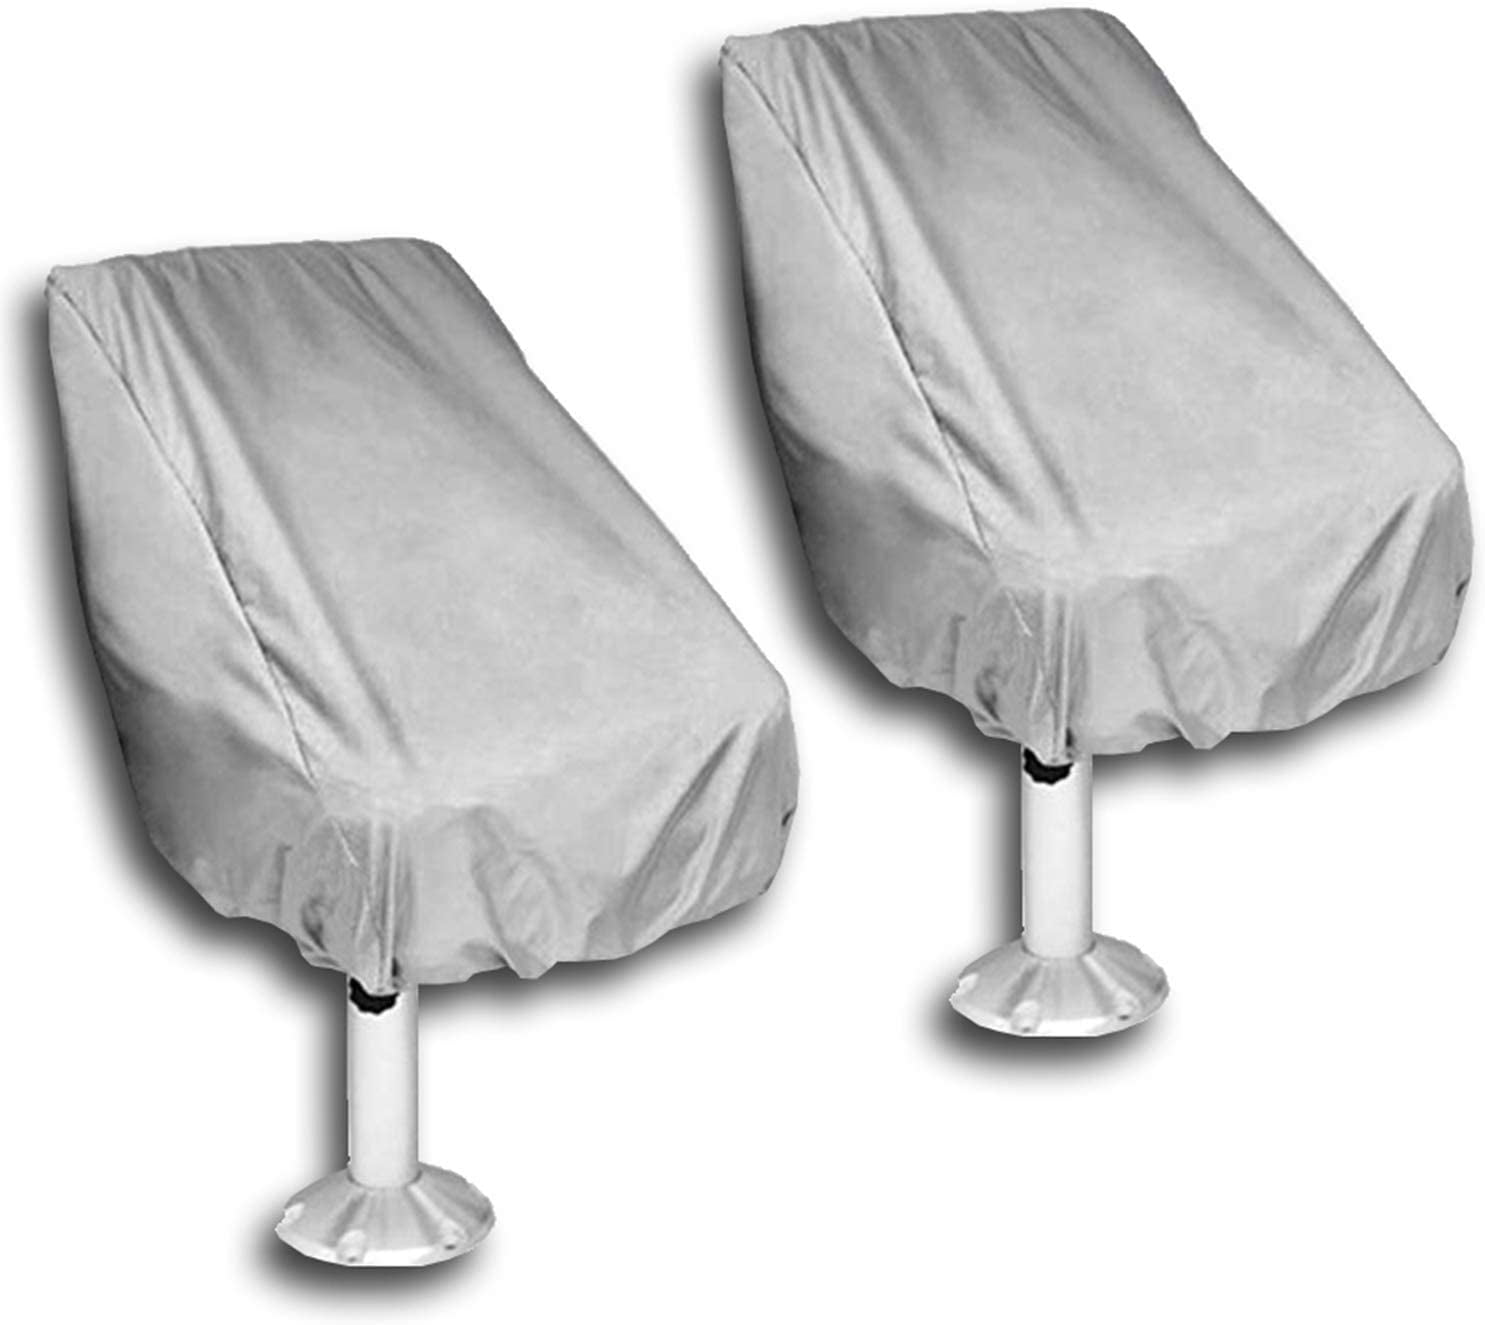 Waterproof Dust Covers for Yacht Captain Chair Oxford Fabric Helm Chair Protective Covers Pedestal Pontoon Captain Boat Bench Chair Seat Cover Outdoor Boat Seat Cover 